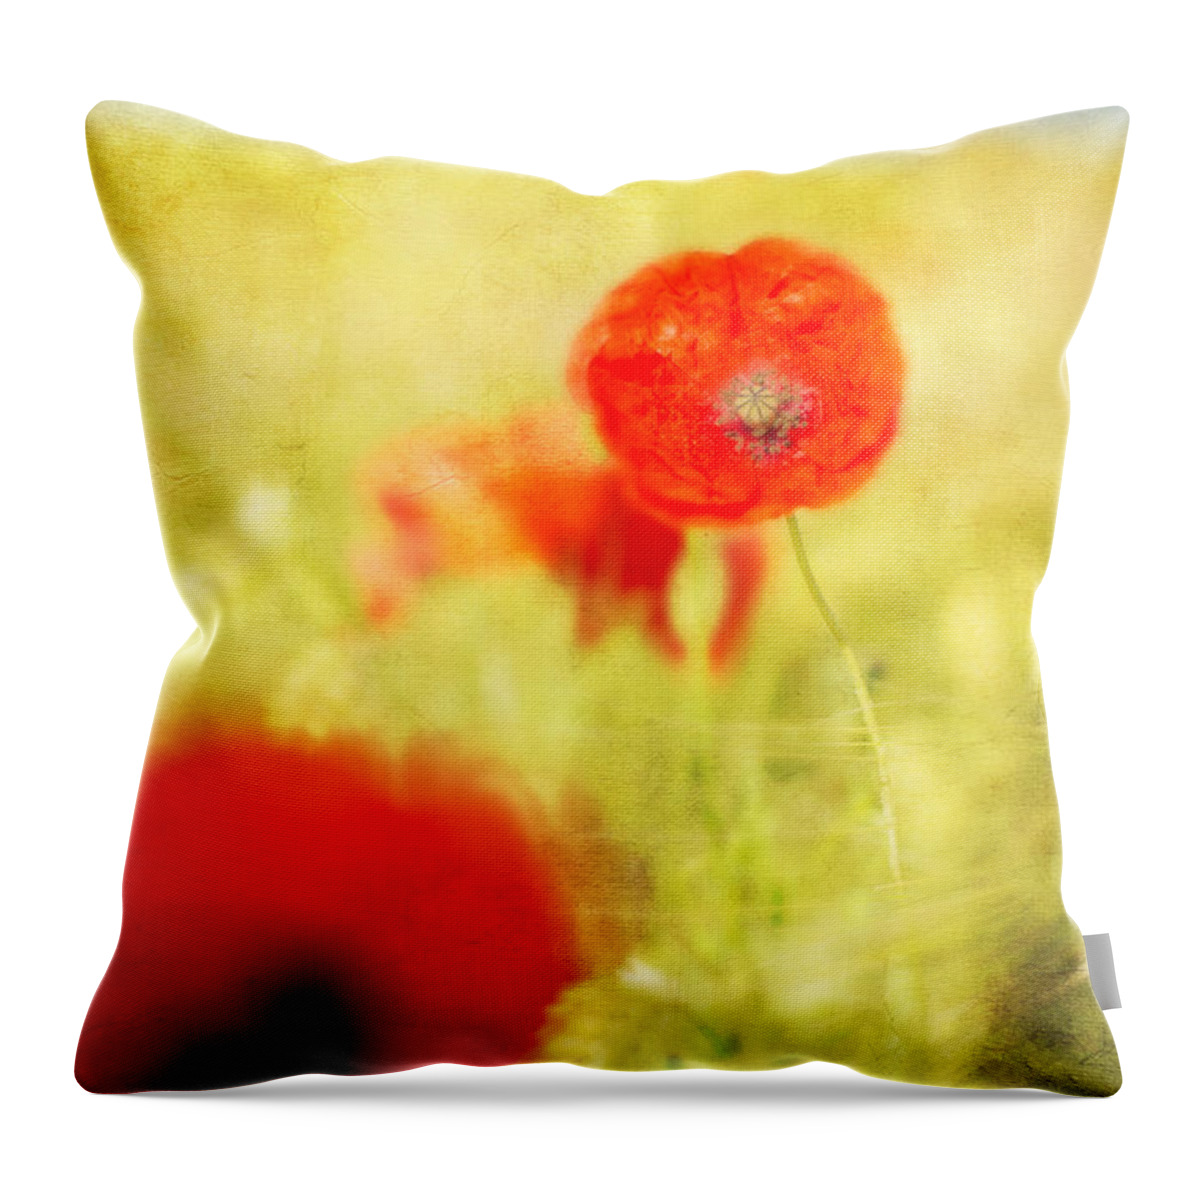 Agriculture Throw Pillow featuring the photograph Summer Painting by Hannes Cmarits